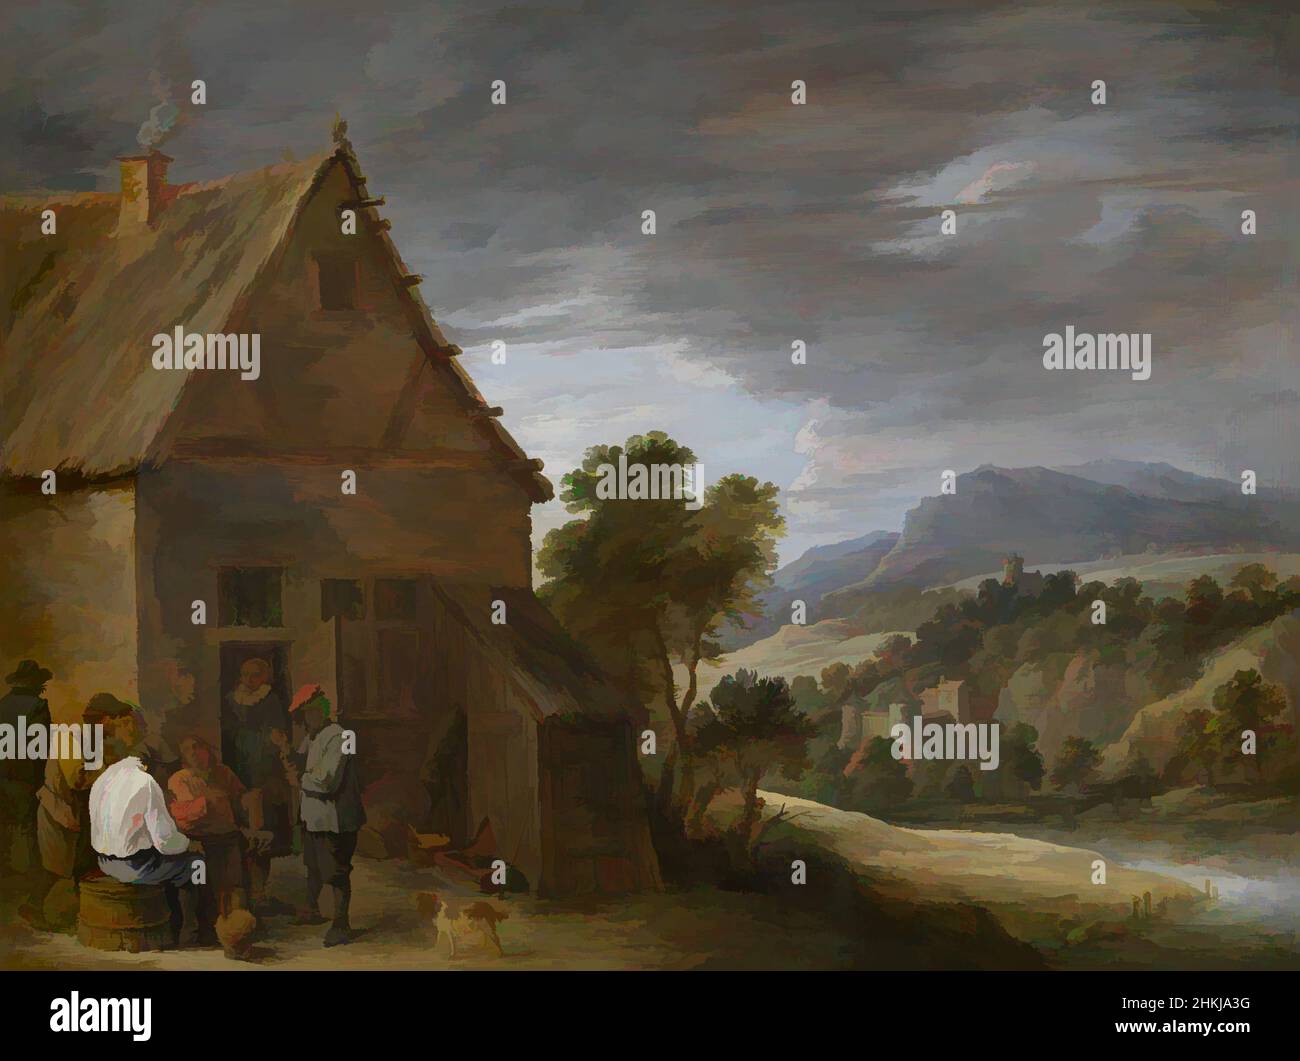 Art inspired by In front of the pub, David Teniers II, 17th century, painting, 17th century, Belgian Art, Classic works modernized by Artotop with a splash of modernity. Shapes, color and value, eye-catching visual impact on art. Emotions through freedom of artworks in a contemporary way. A timeless message pursuing a wildly creative new direction. Artists turning to the digital medium and creating the Artotop NFT Stock Photo